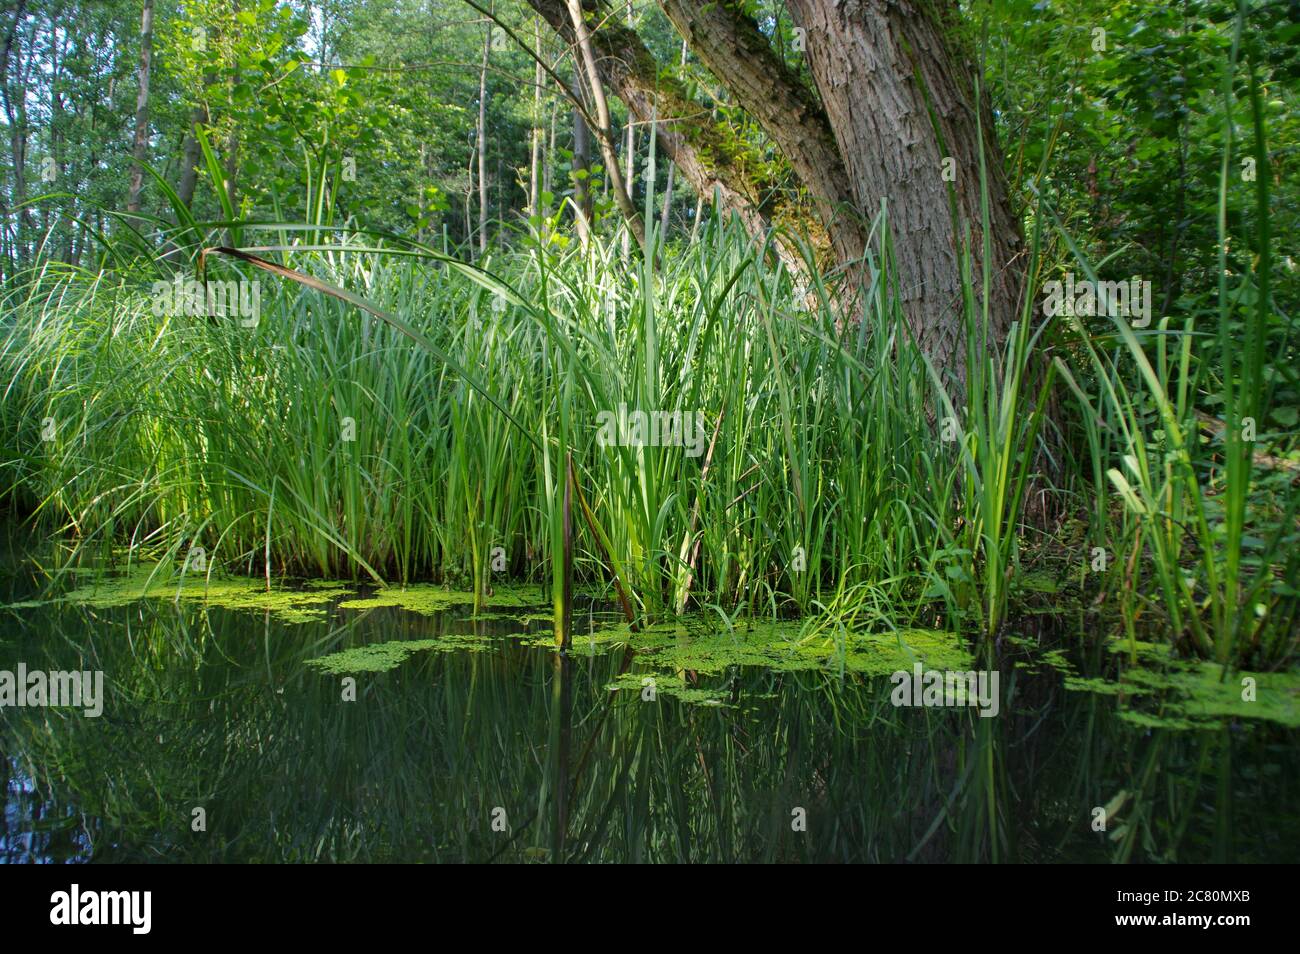 Restoring natural water retention reservoirs. Wild wetland with the grass and reeds in forest. Concept of nature, ecology and environment care. Stock Photo